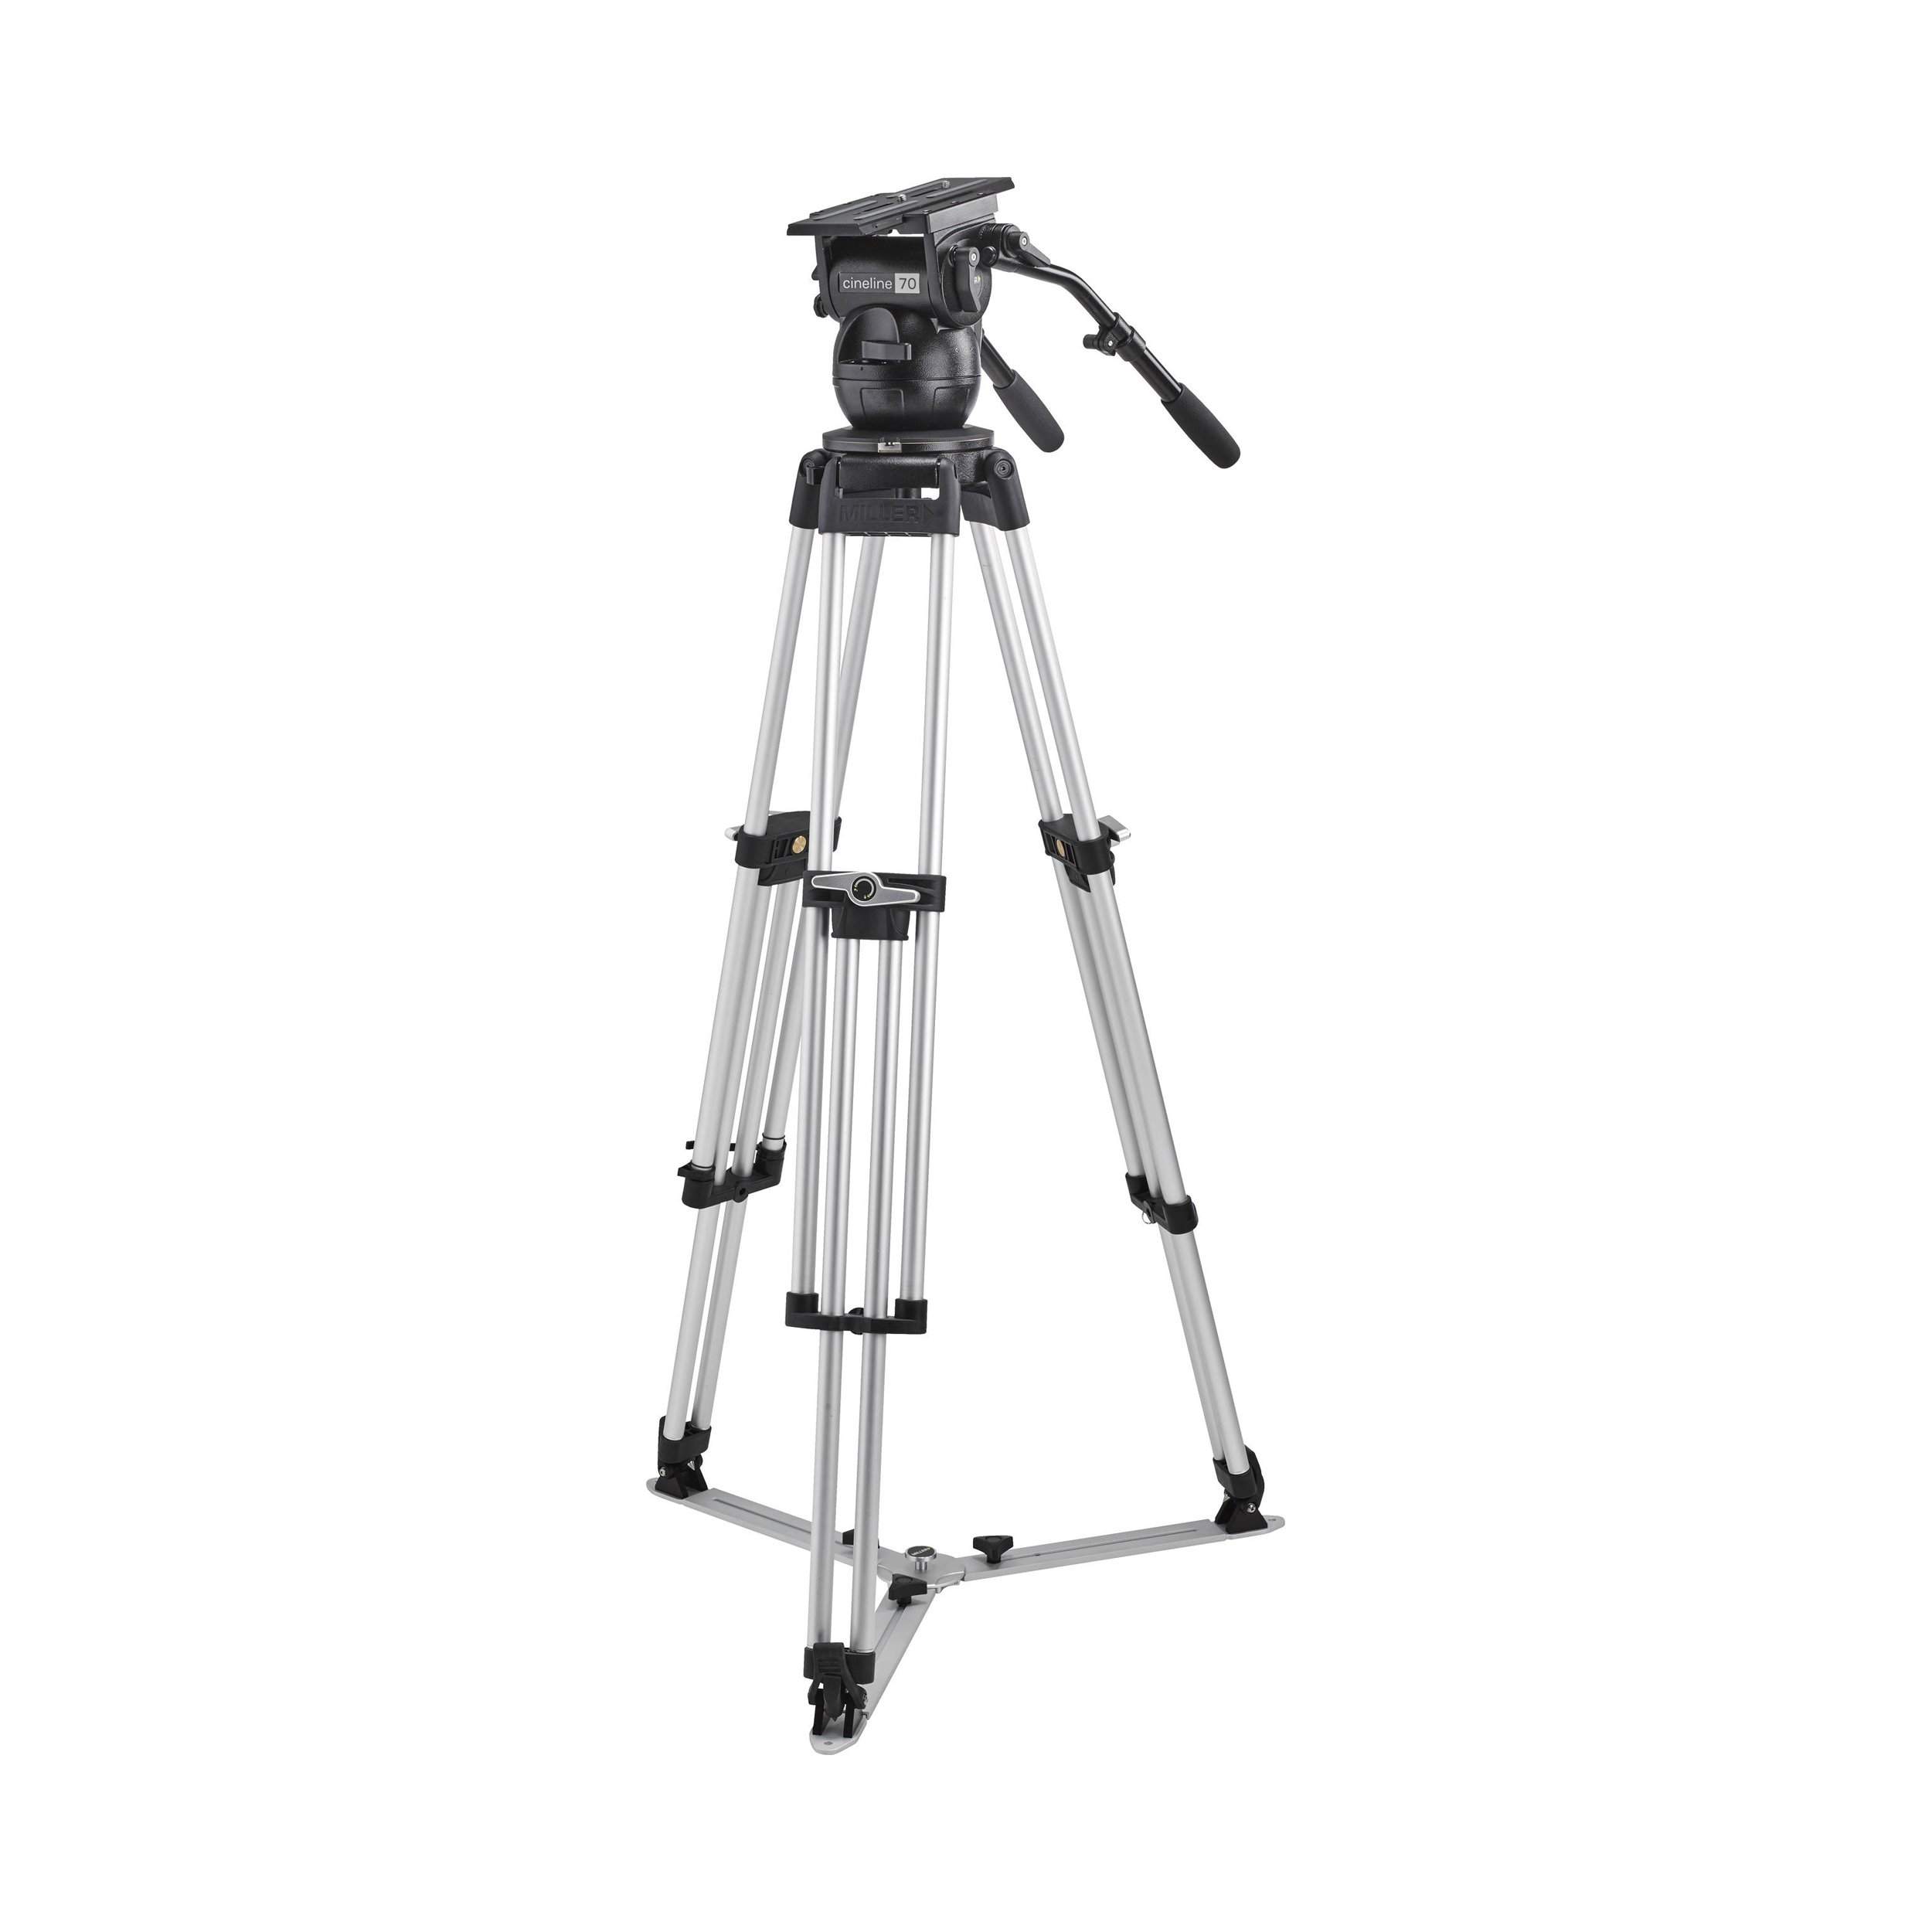 MILLER Cineline 70 Fluid Head (1055) HD MB 1-St Alloy Tripod (2110G) HD Ground Spreader (2130) MB adaptor with clamp (1225) 2 x Pan Handle (698)